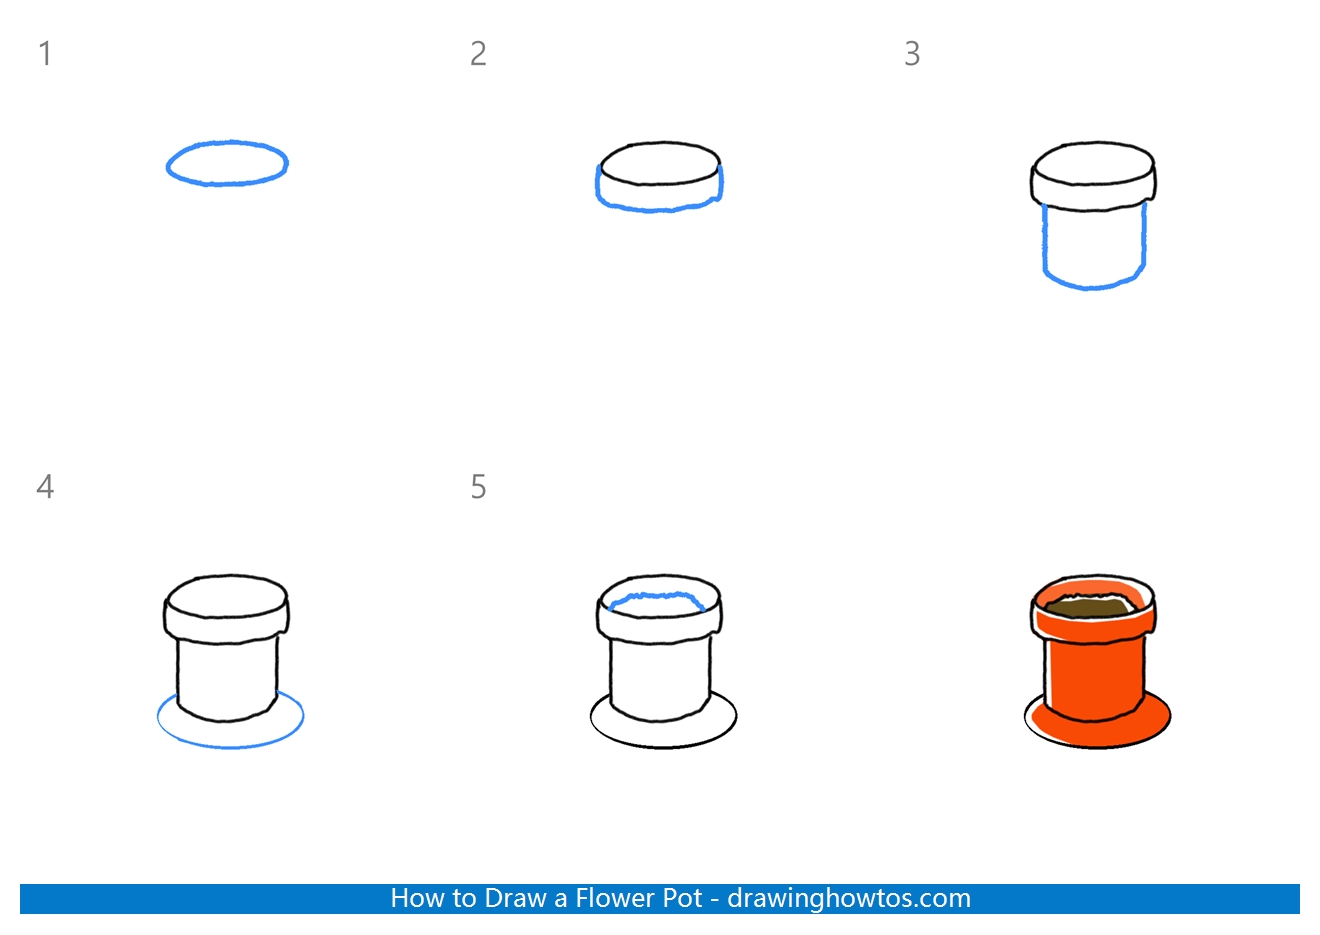 How to Draw a Flower Pot Step by Step